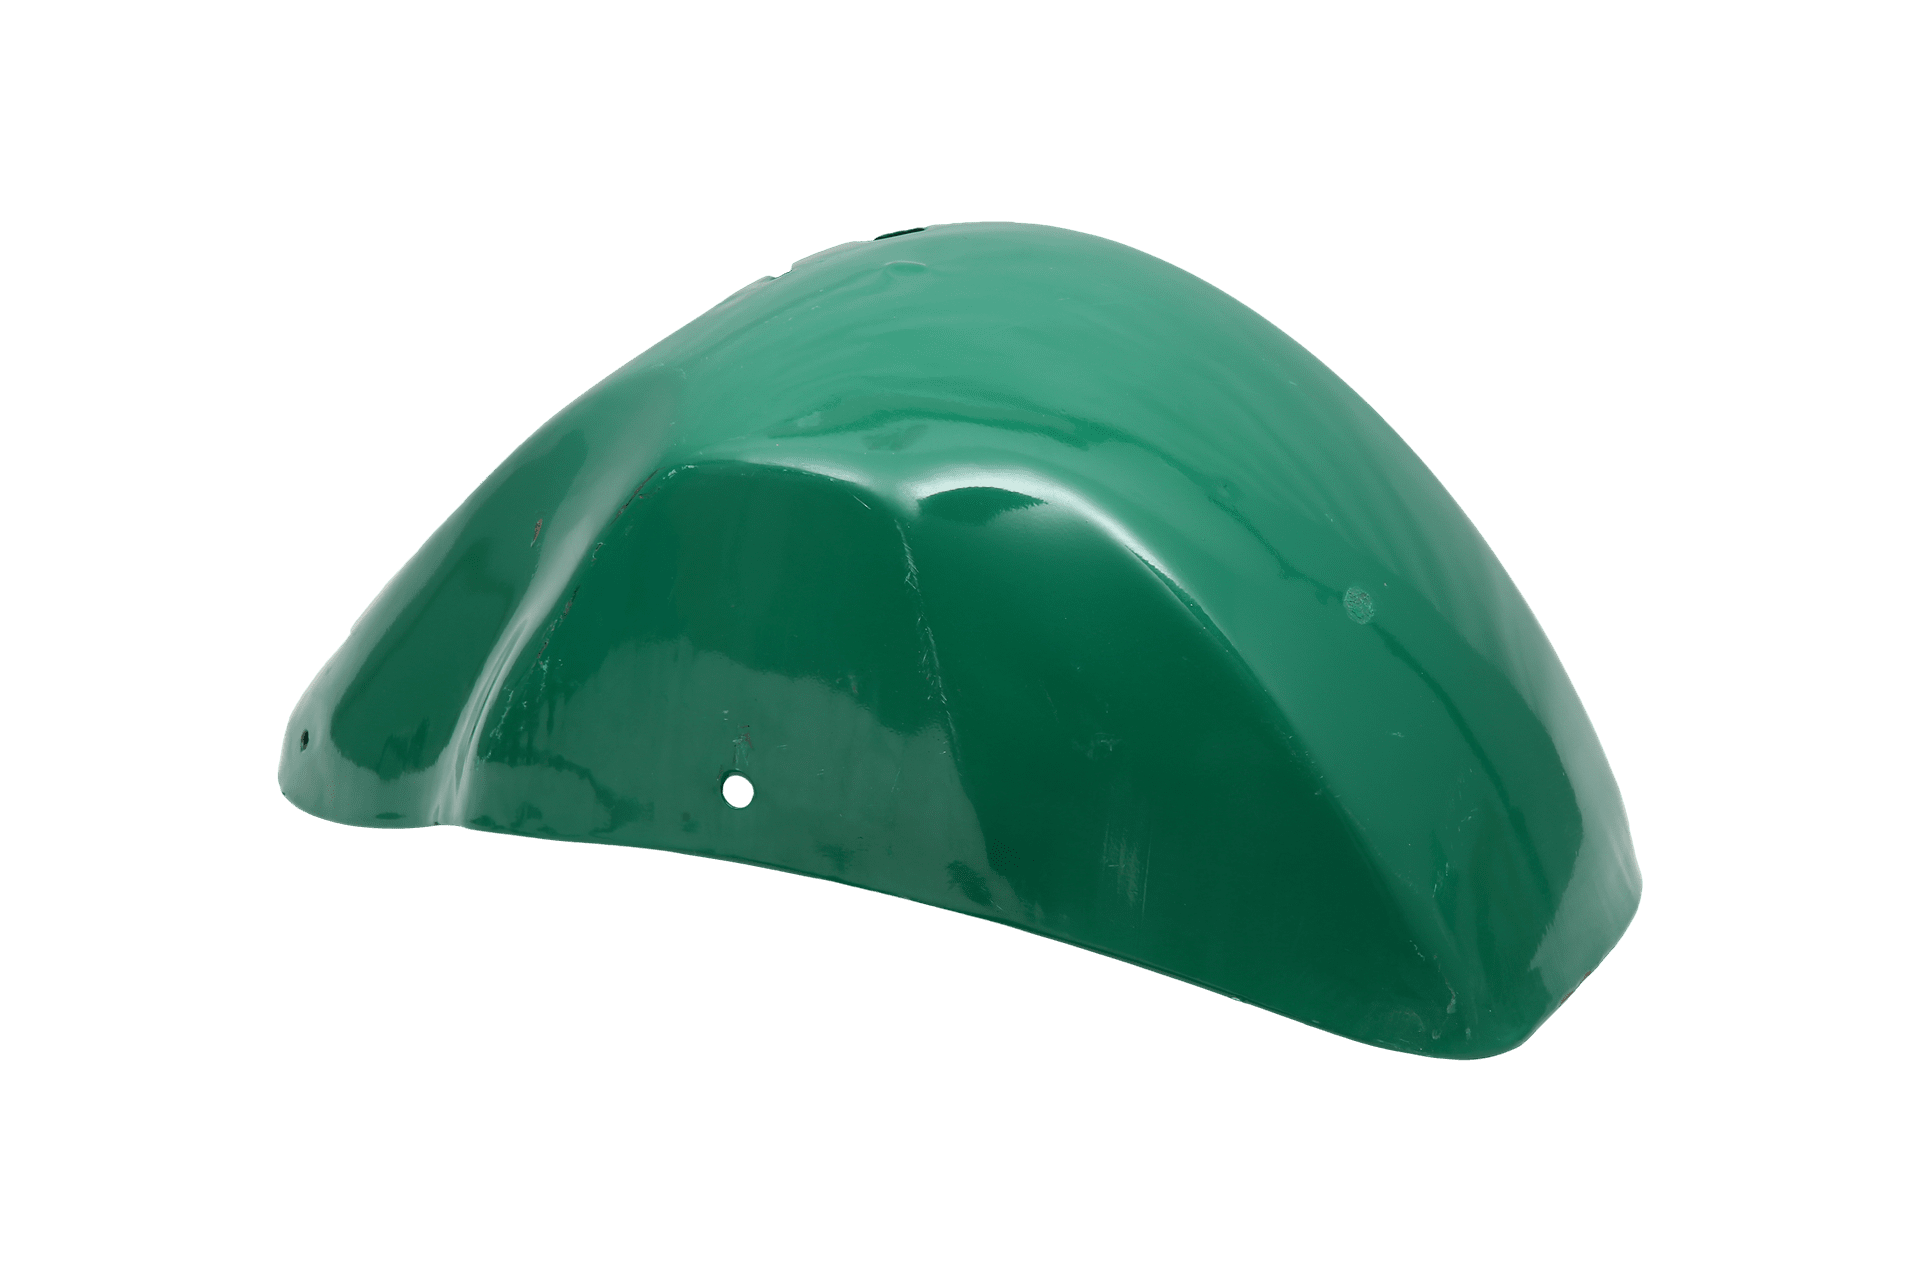 Copy of FRONT MUDGUARD GREEN.png